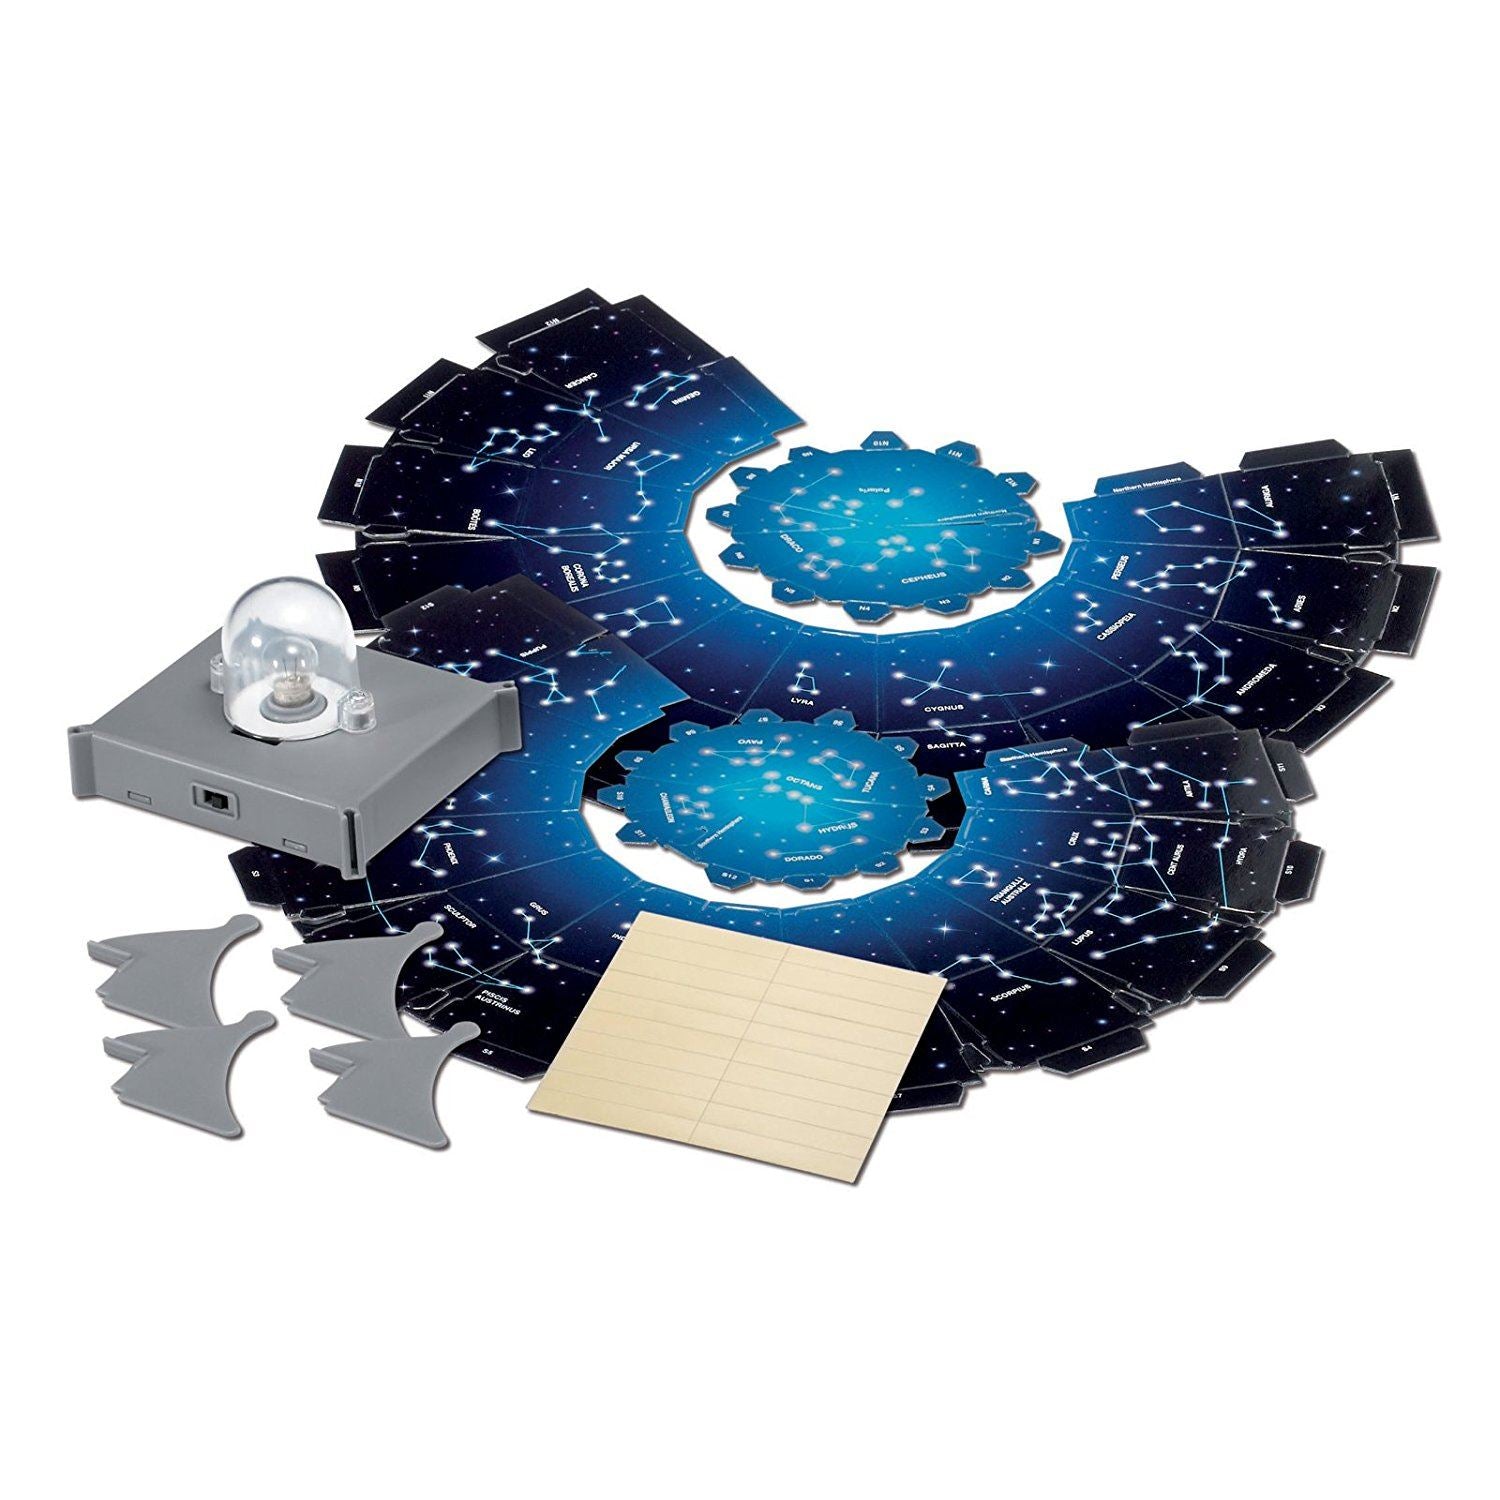 Great Gizmos 4M KidzLabs Create A Night Sky Projection Kit